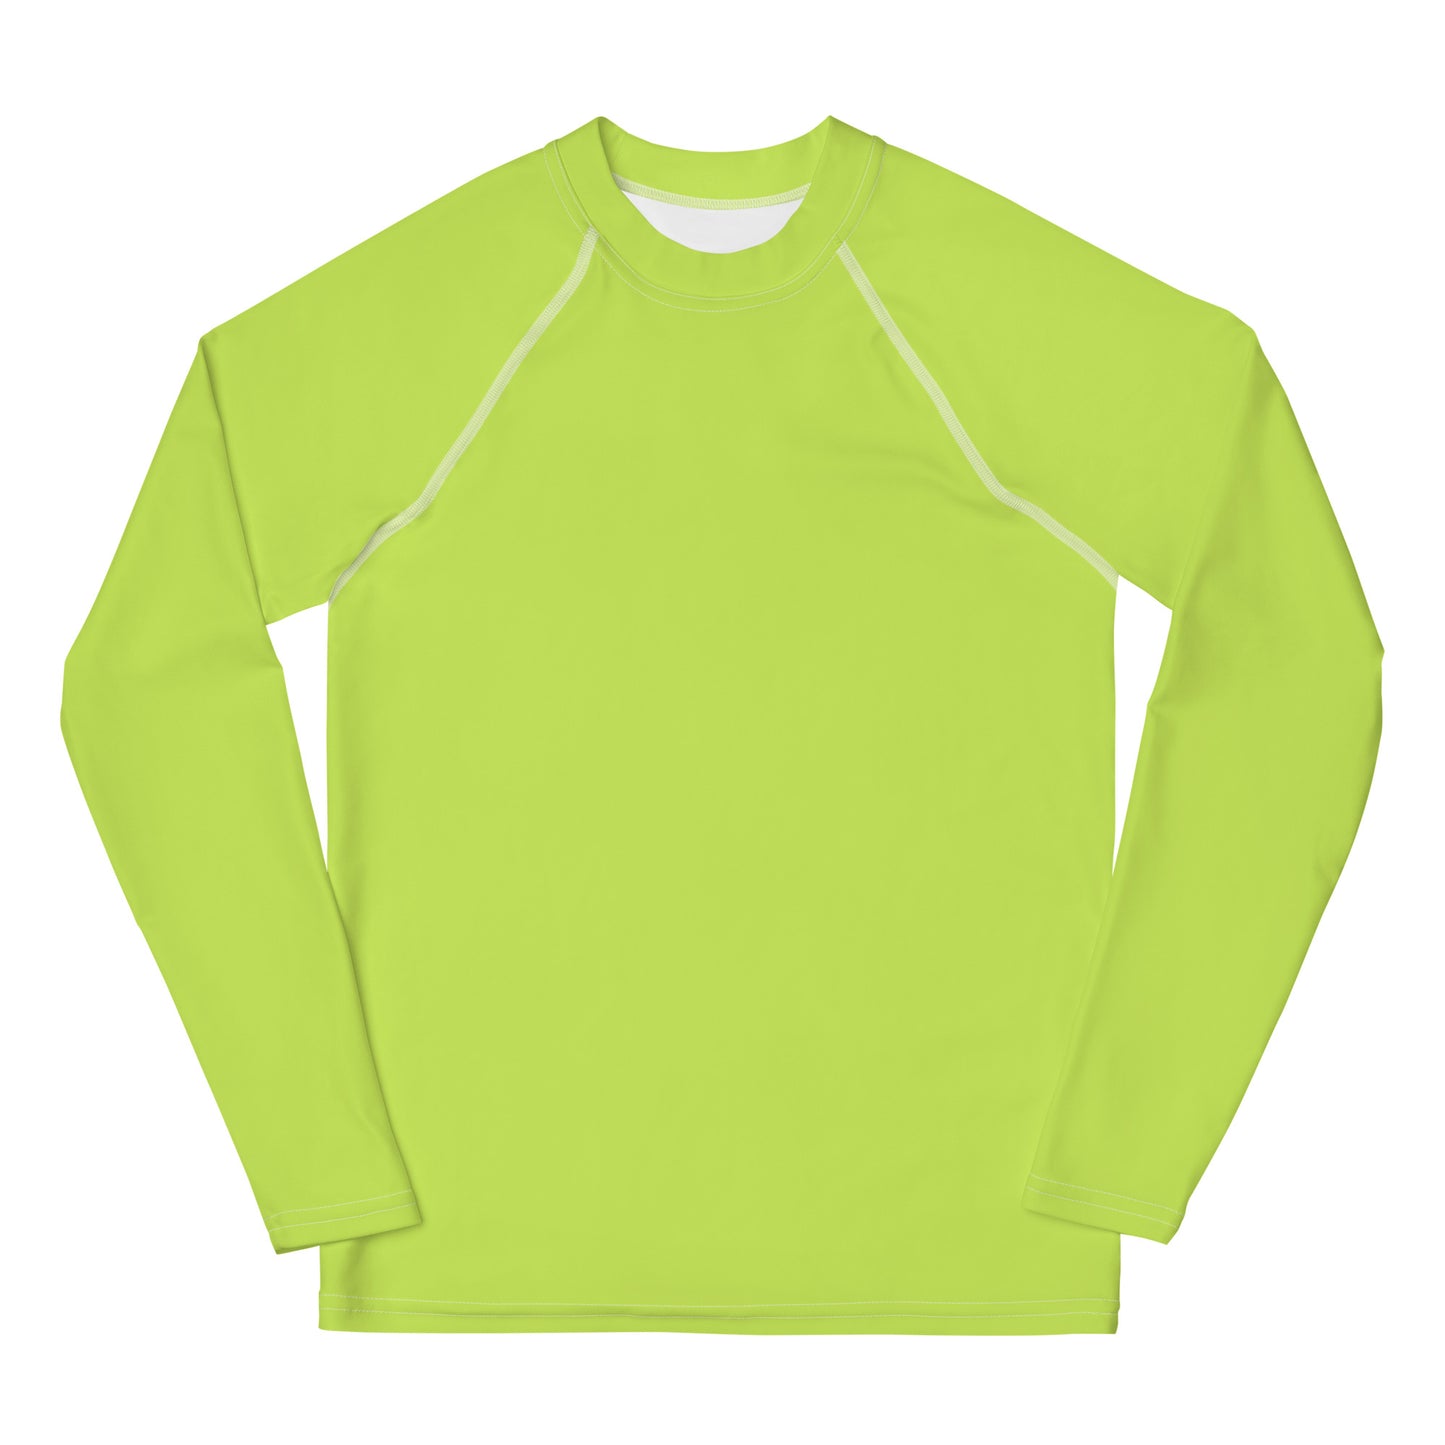 Fluorescent Green Youth Rash Guard by Baked Fresca